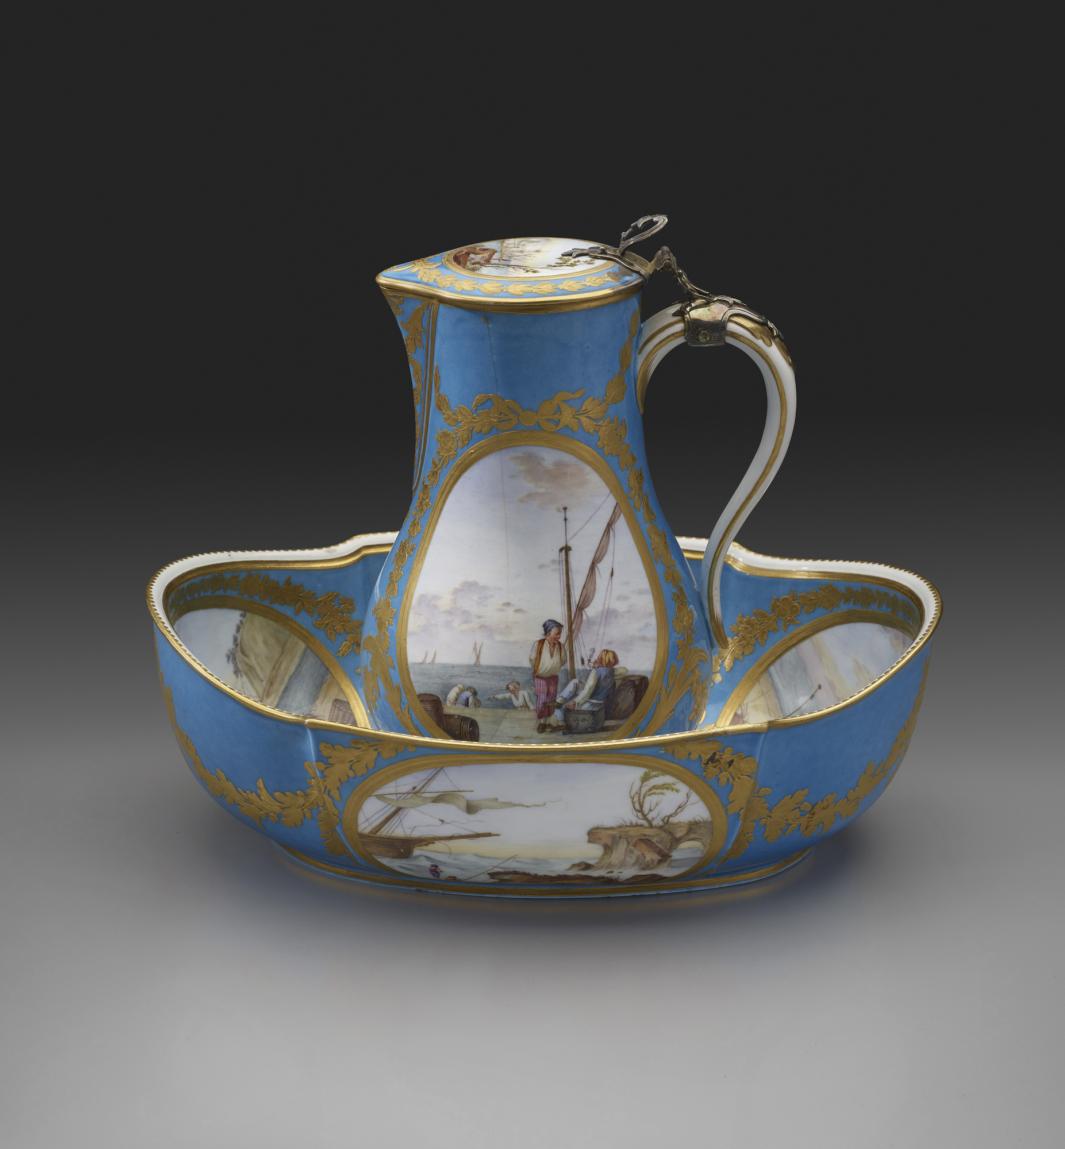 white porcelain covered water jug with basin, decorated with a blue and gold and seascape scenes